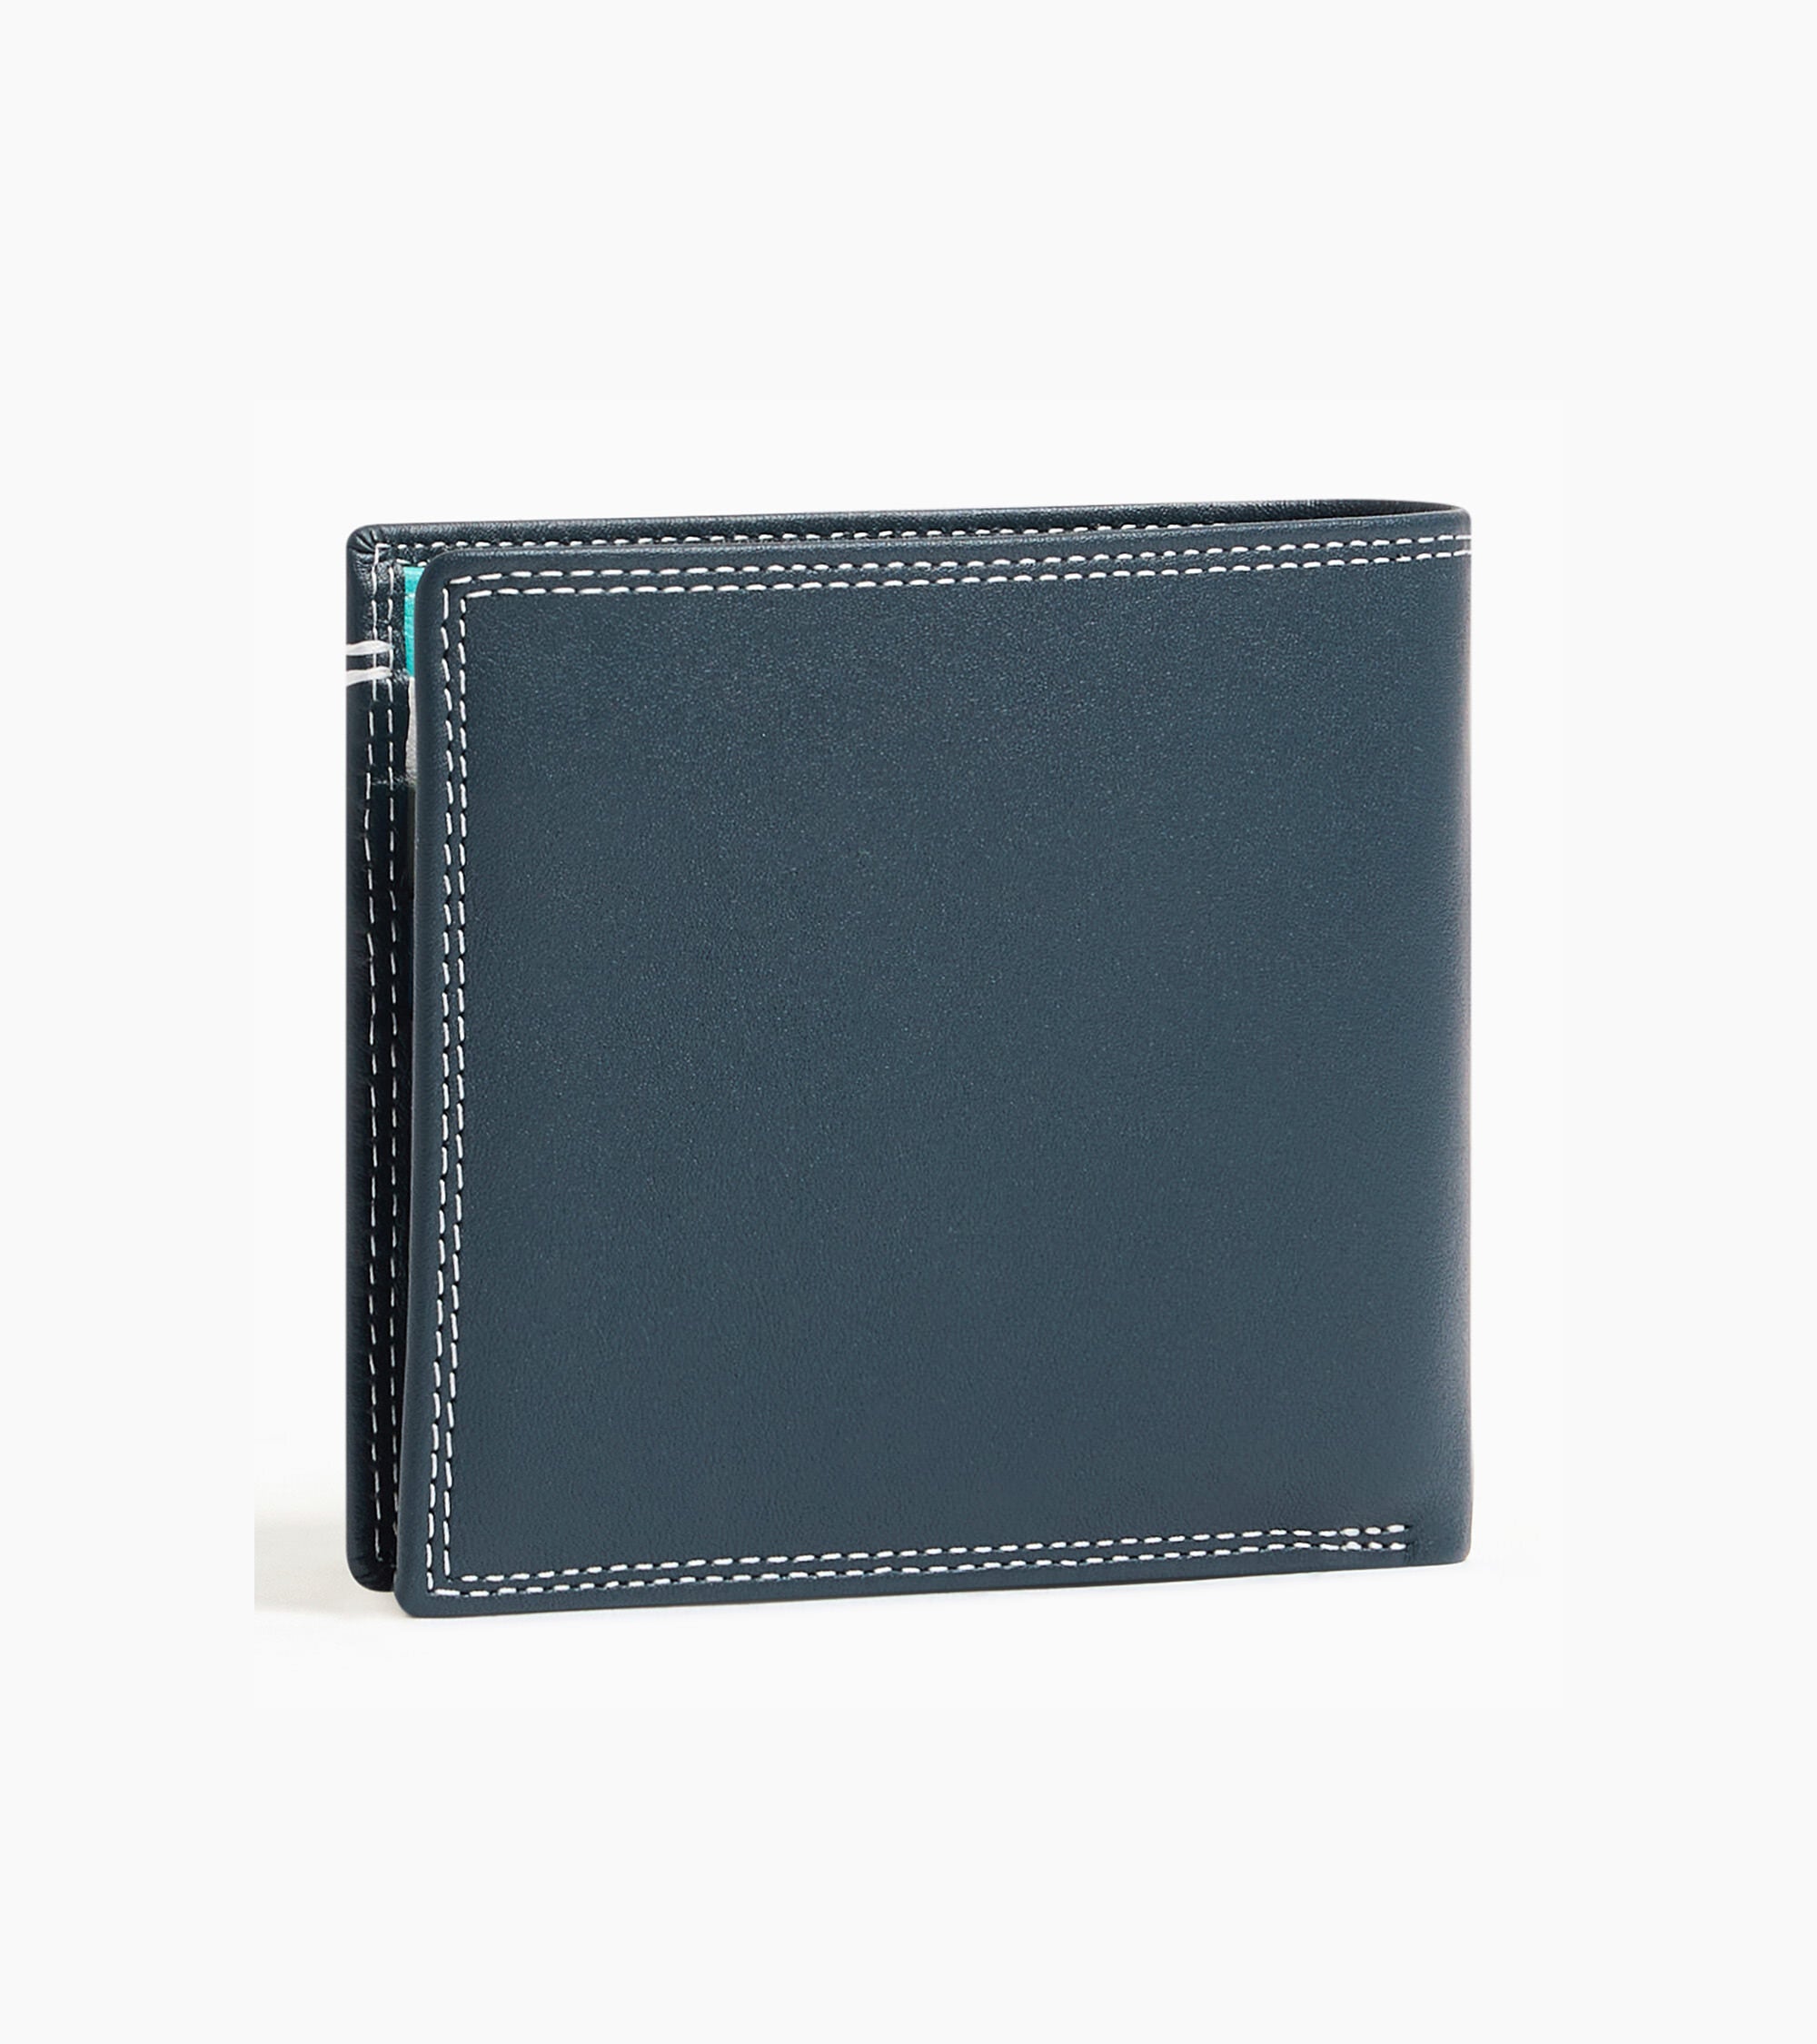 Martin smooth leather 2-fold flap wallet